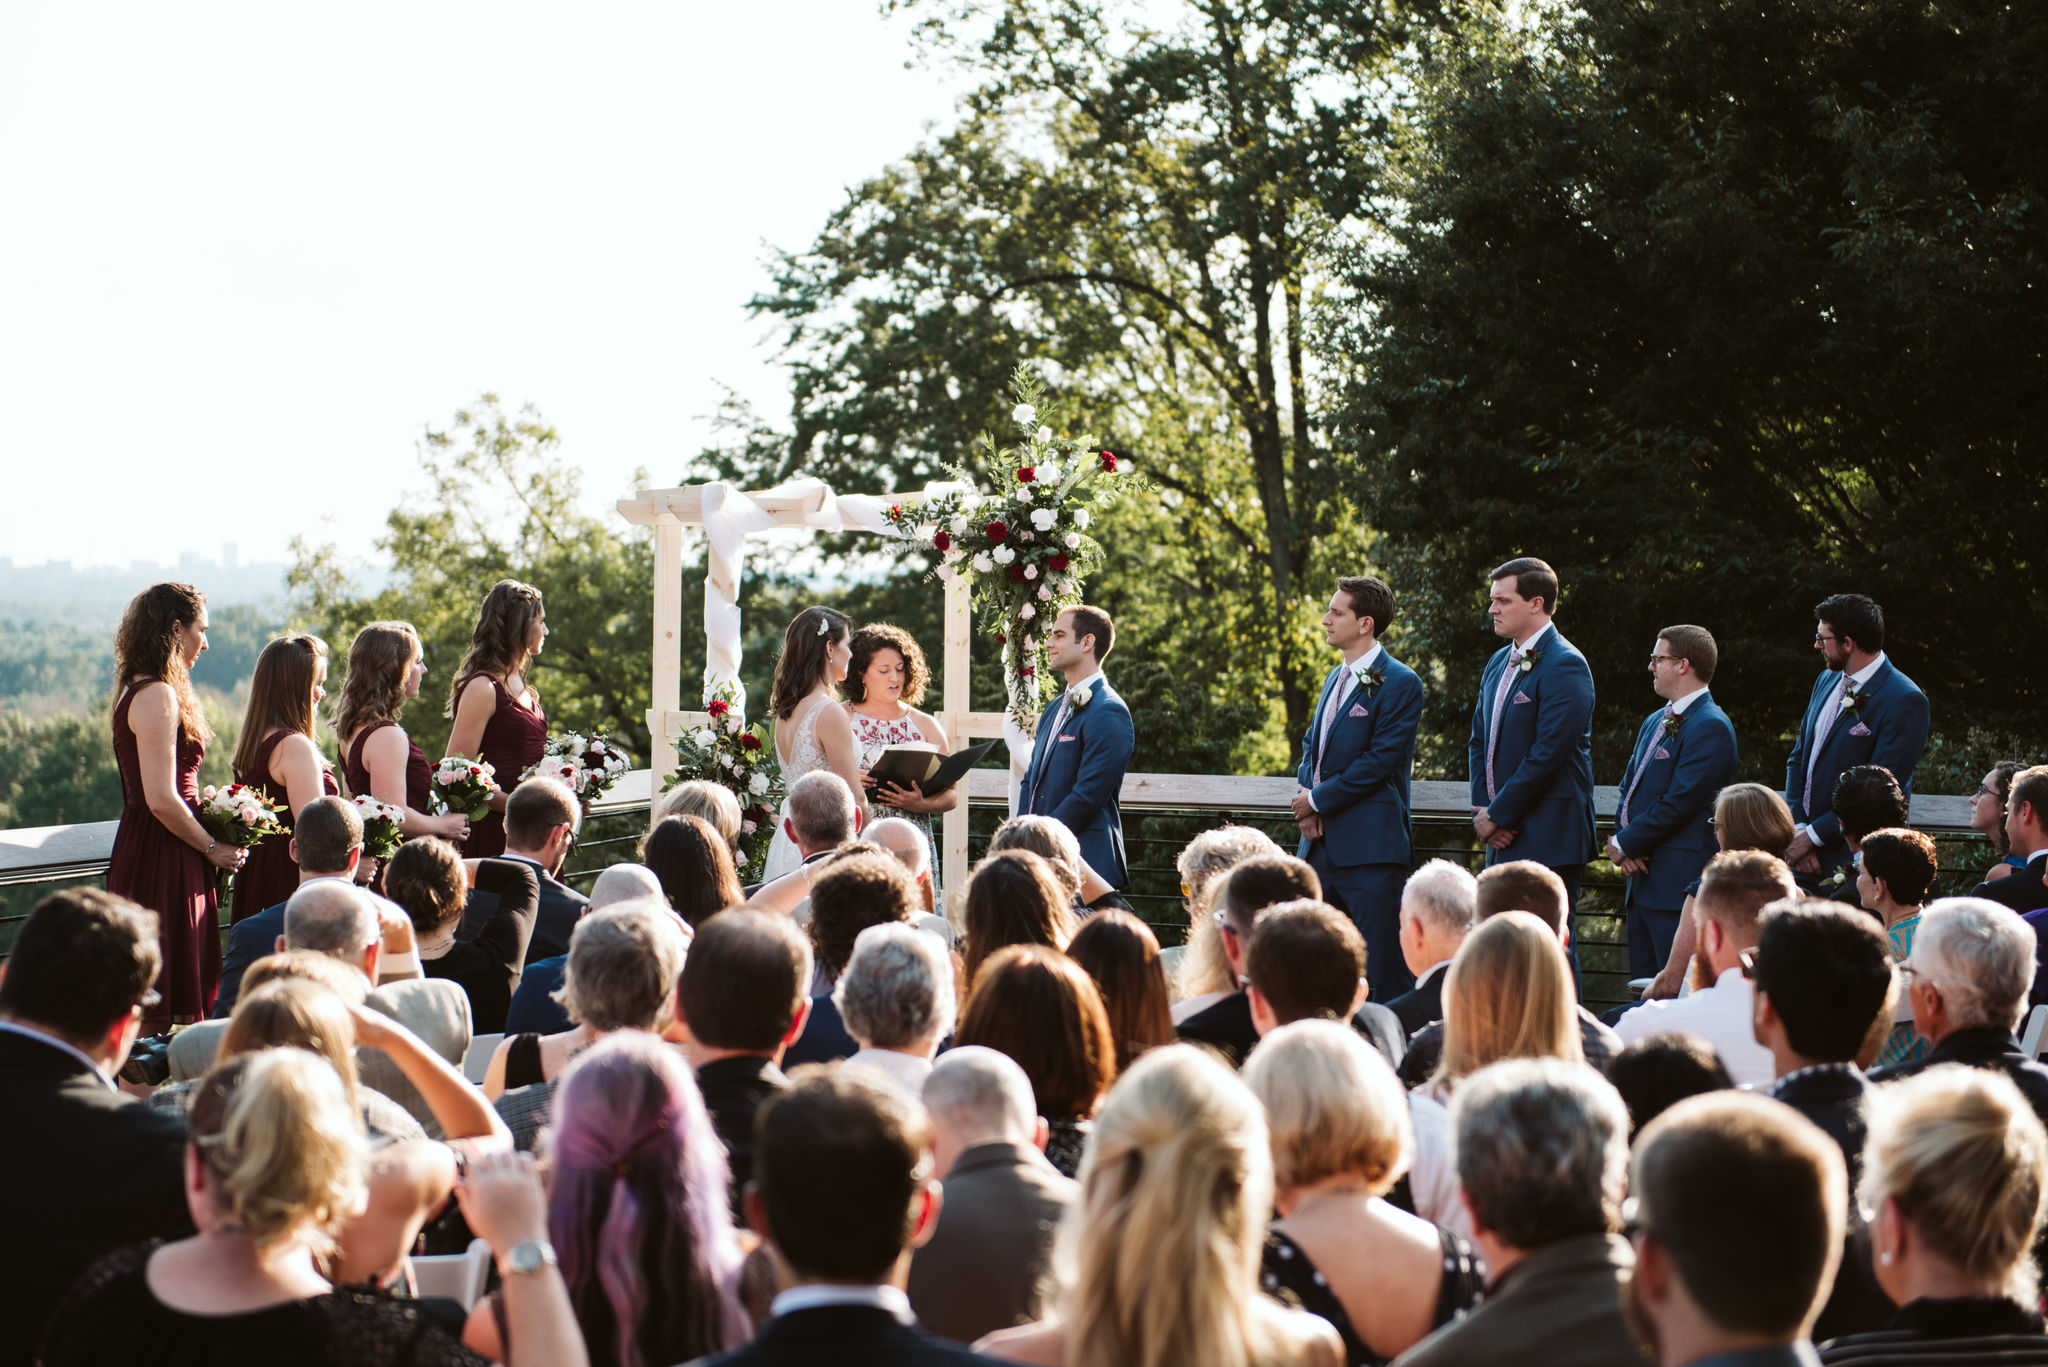  Phoenix Maryland, Baltimore Wedding Photographer, Eagle’s Nest Country Club, Classic, Romantic, Overall Photo of the Wedding, Couple Getting Married Surrounded by Family and Friends, Outdoor Ceremony 